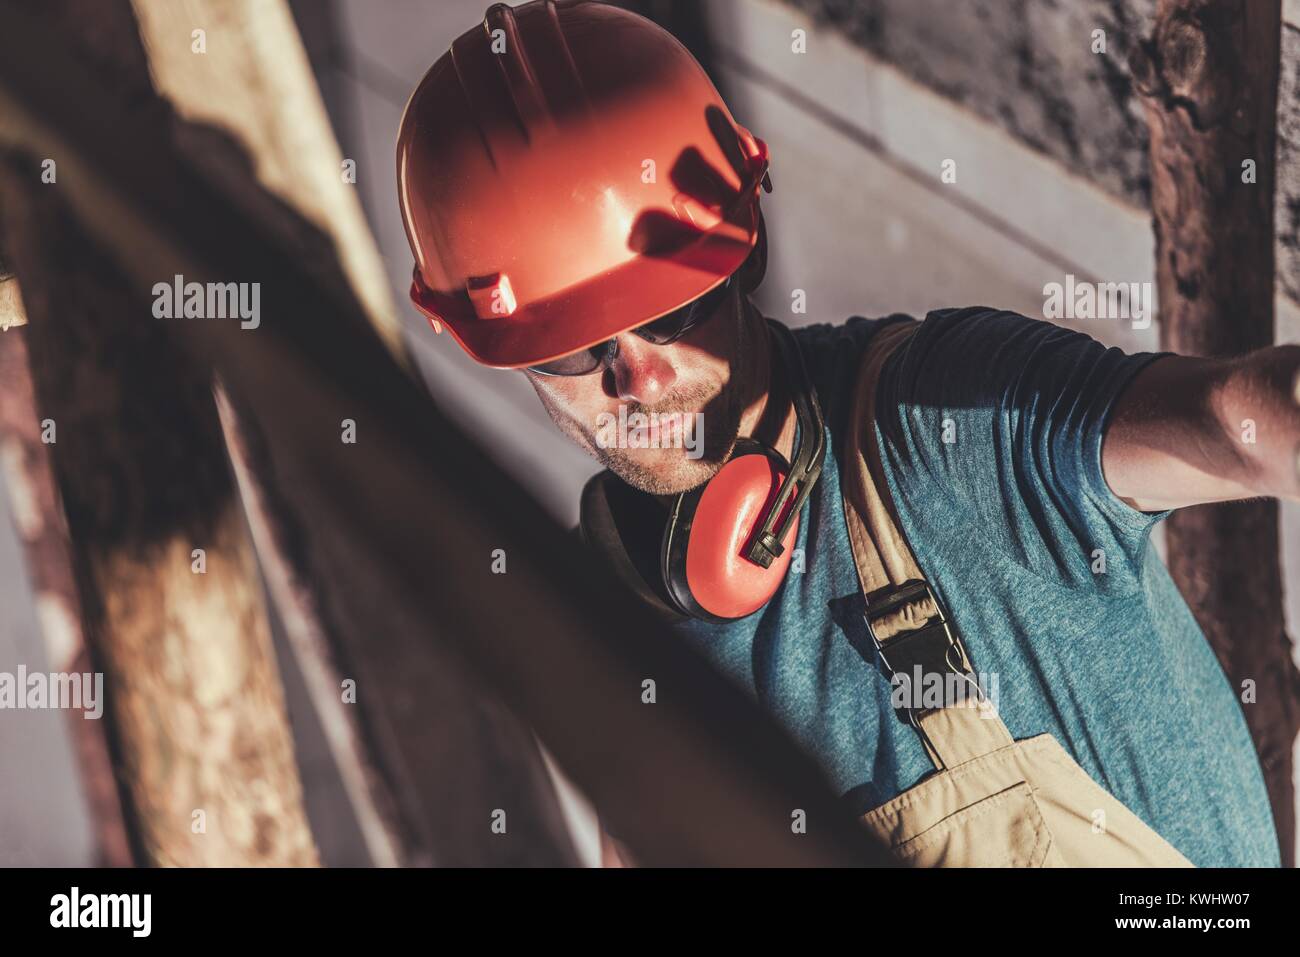 Disturbing Industrial Welding Light. Caucasian Construction Site Worker Covering His Face From Bright Dangerous For Eyes Light Coming From Electric We Stock Photo